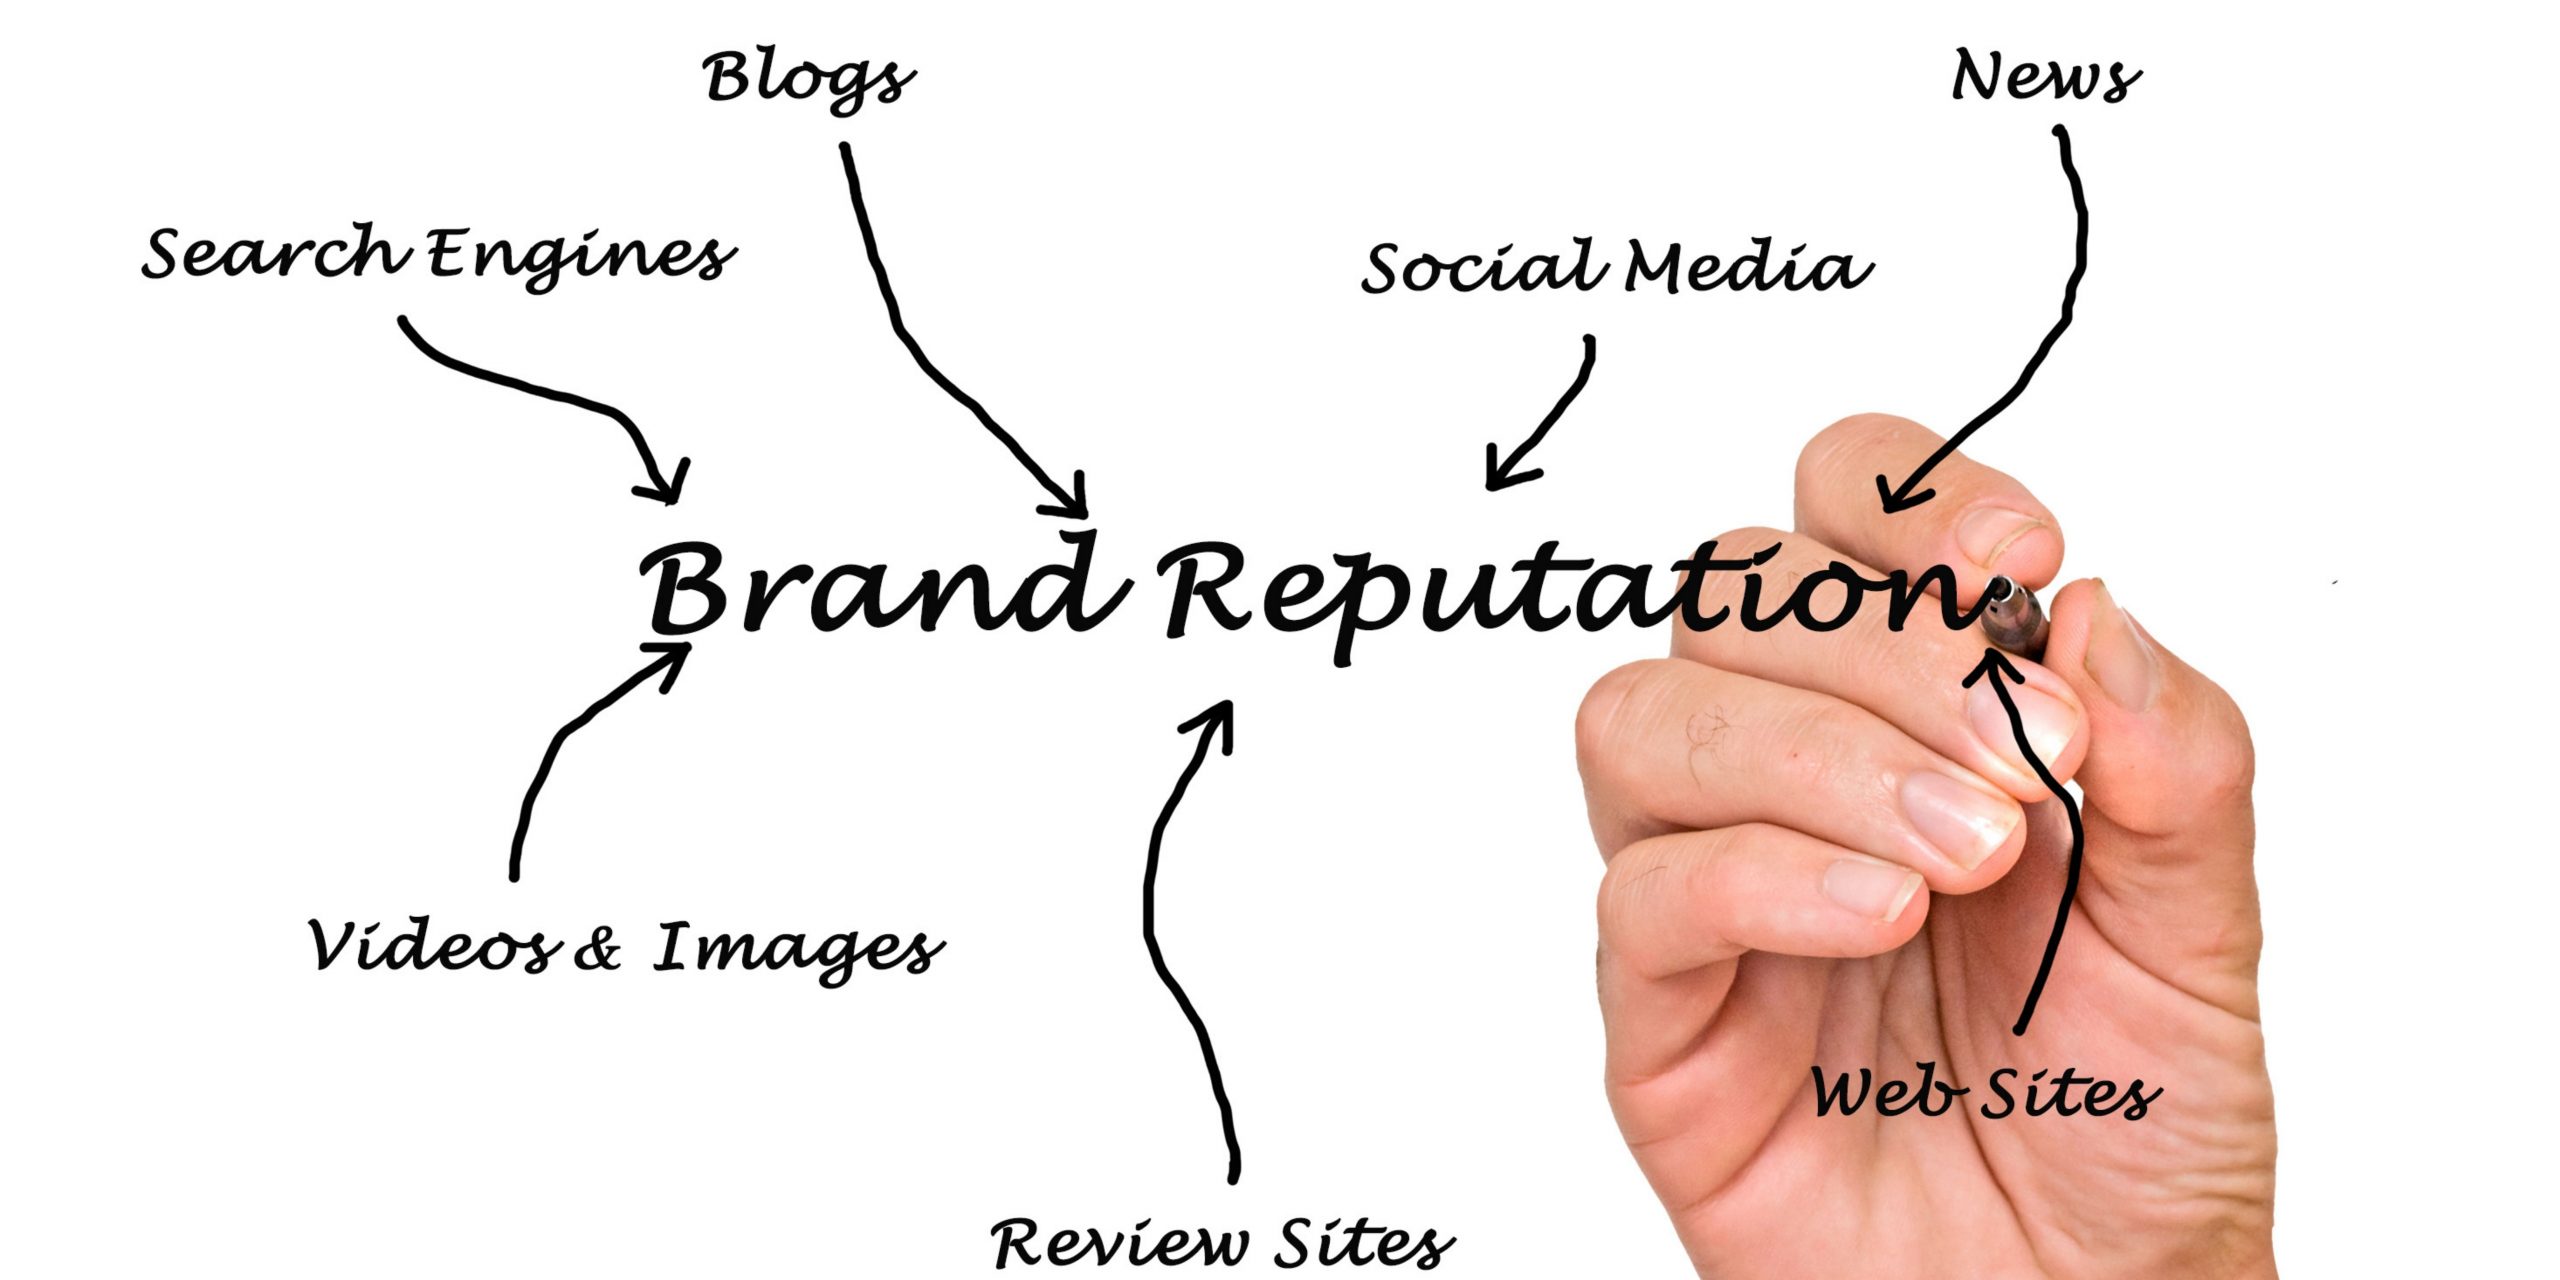 How to Protect and Improve Your Brand's Reputation Online